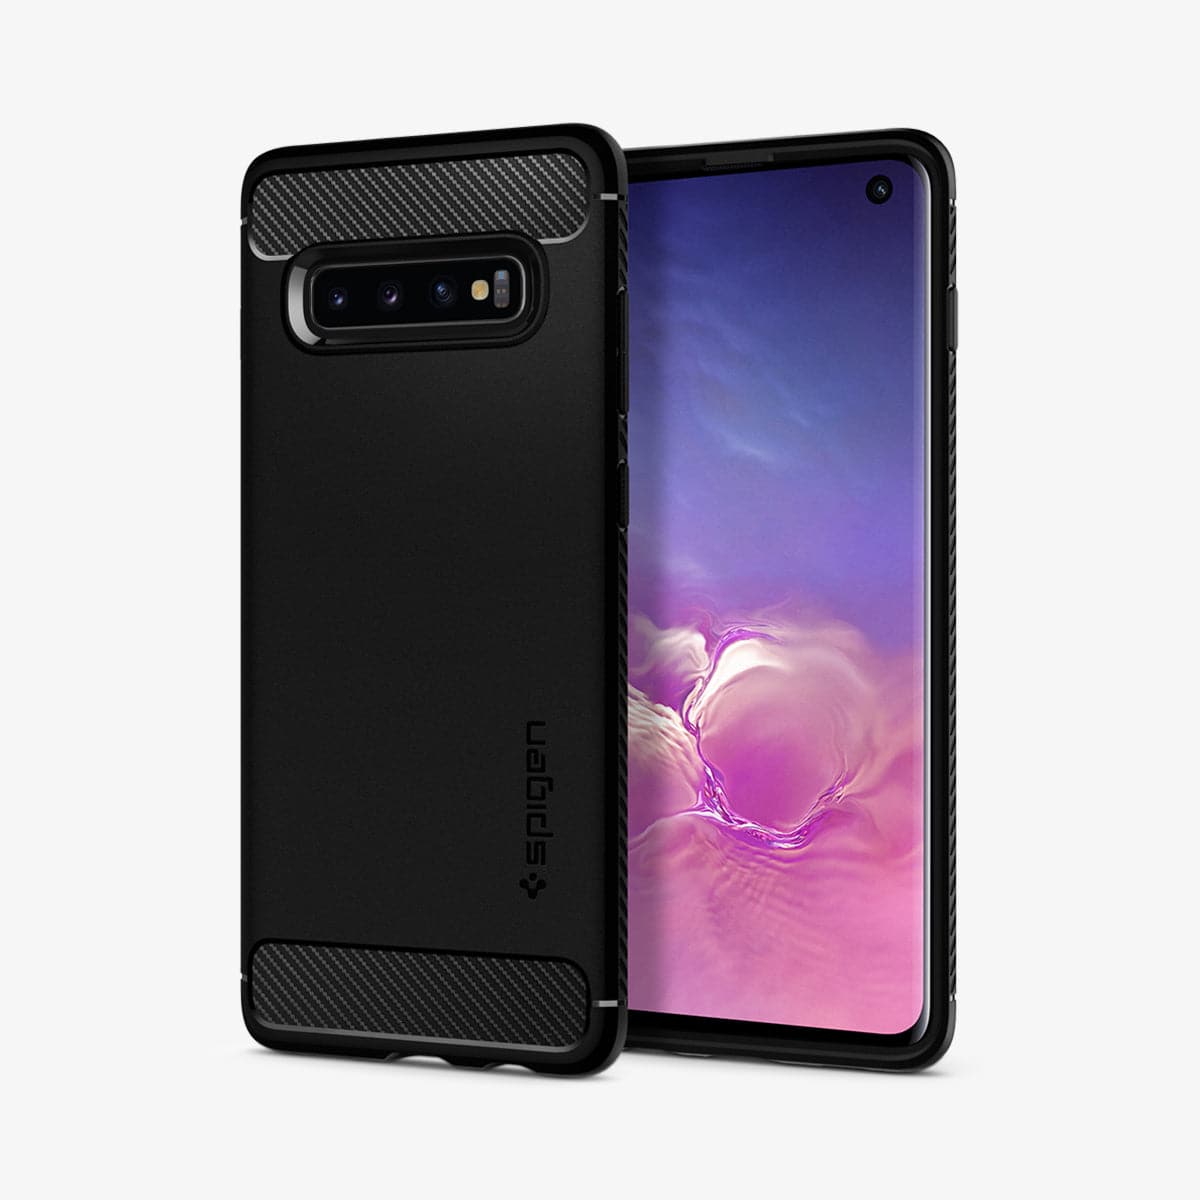 605CS25800 - Galaxy S10 Rugged Armor Case in black showing the back and front